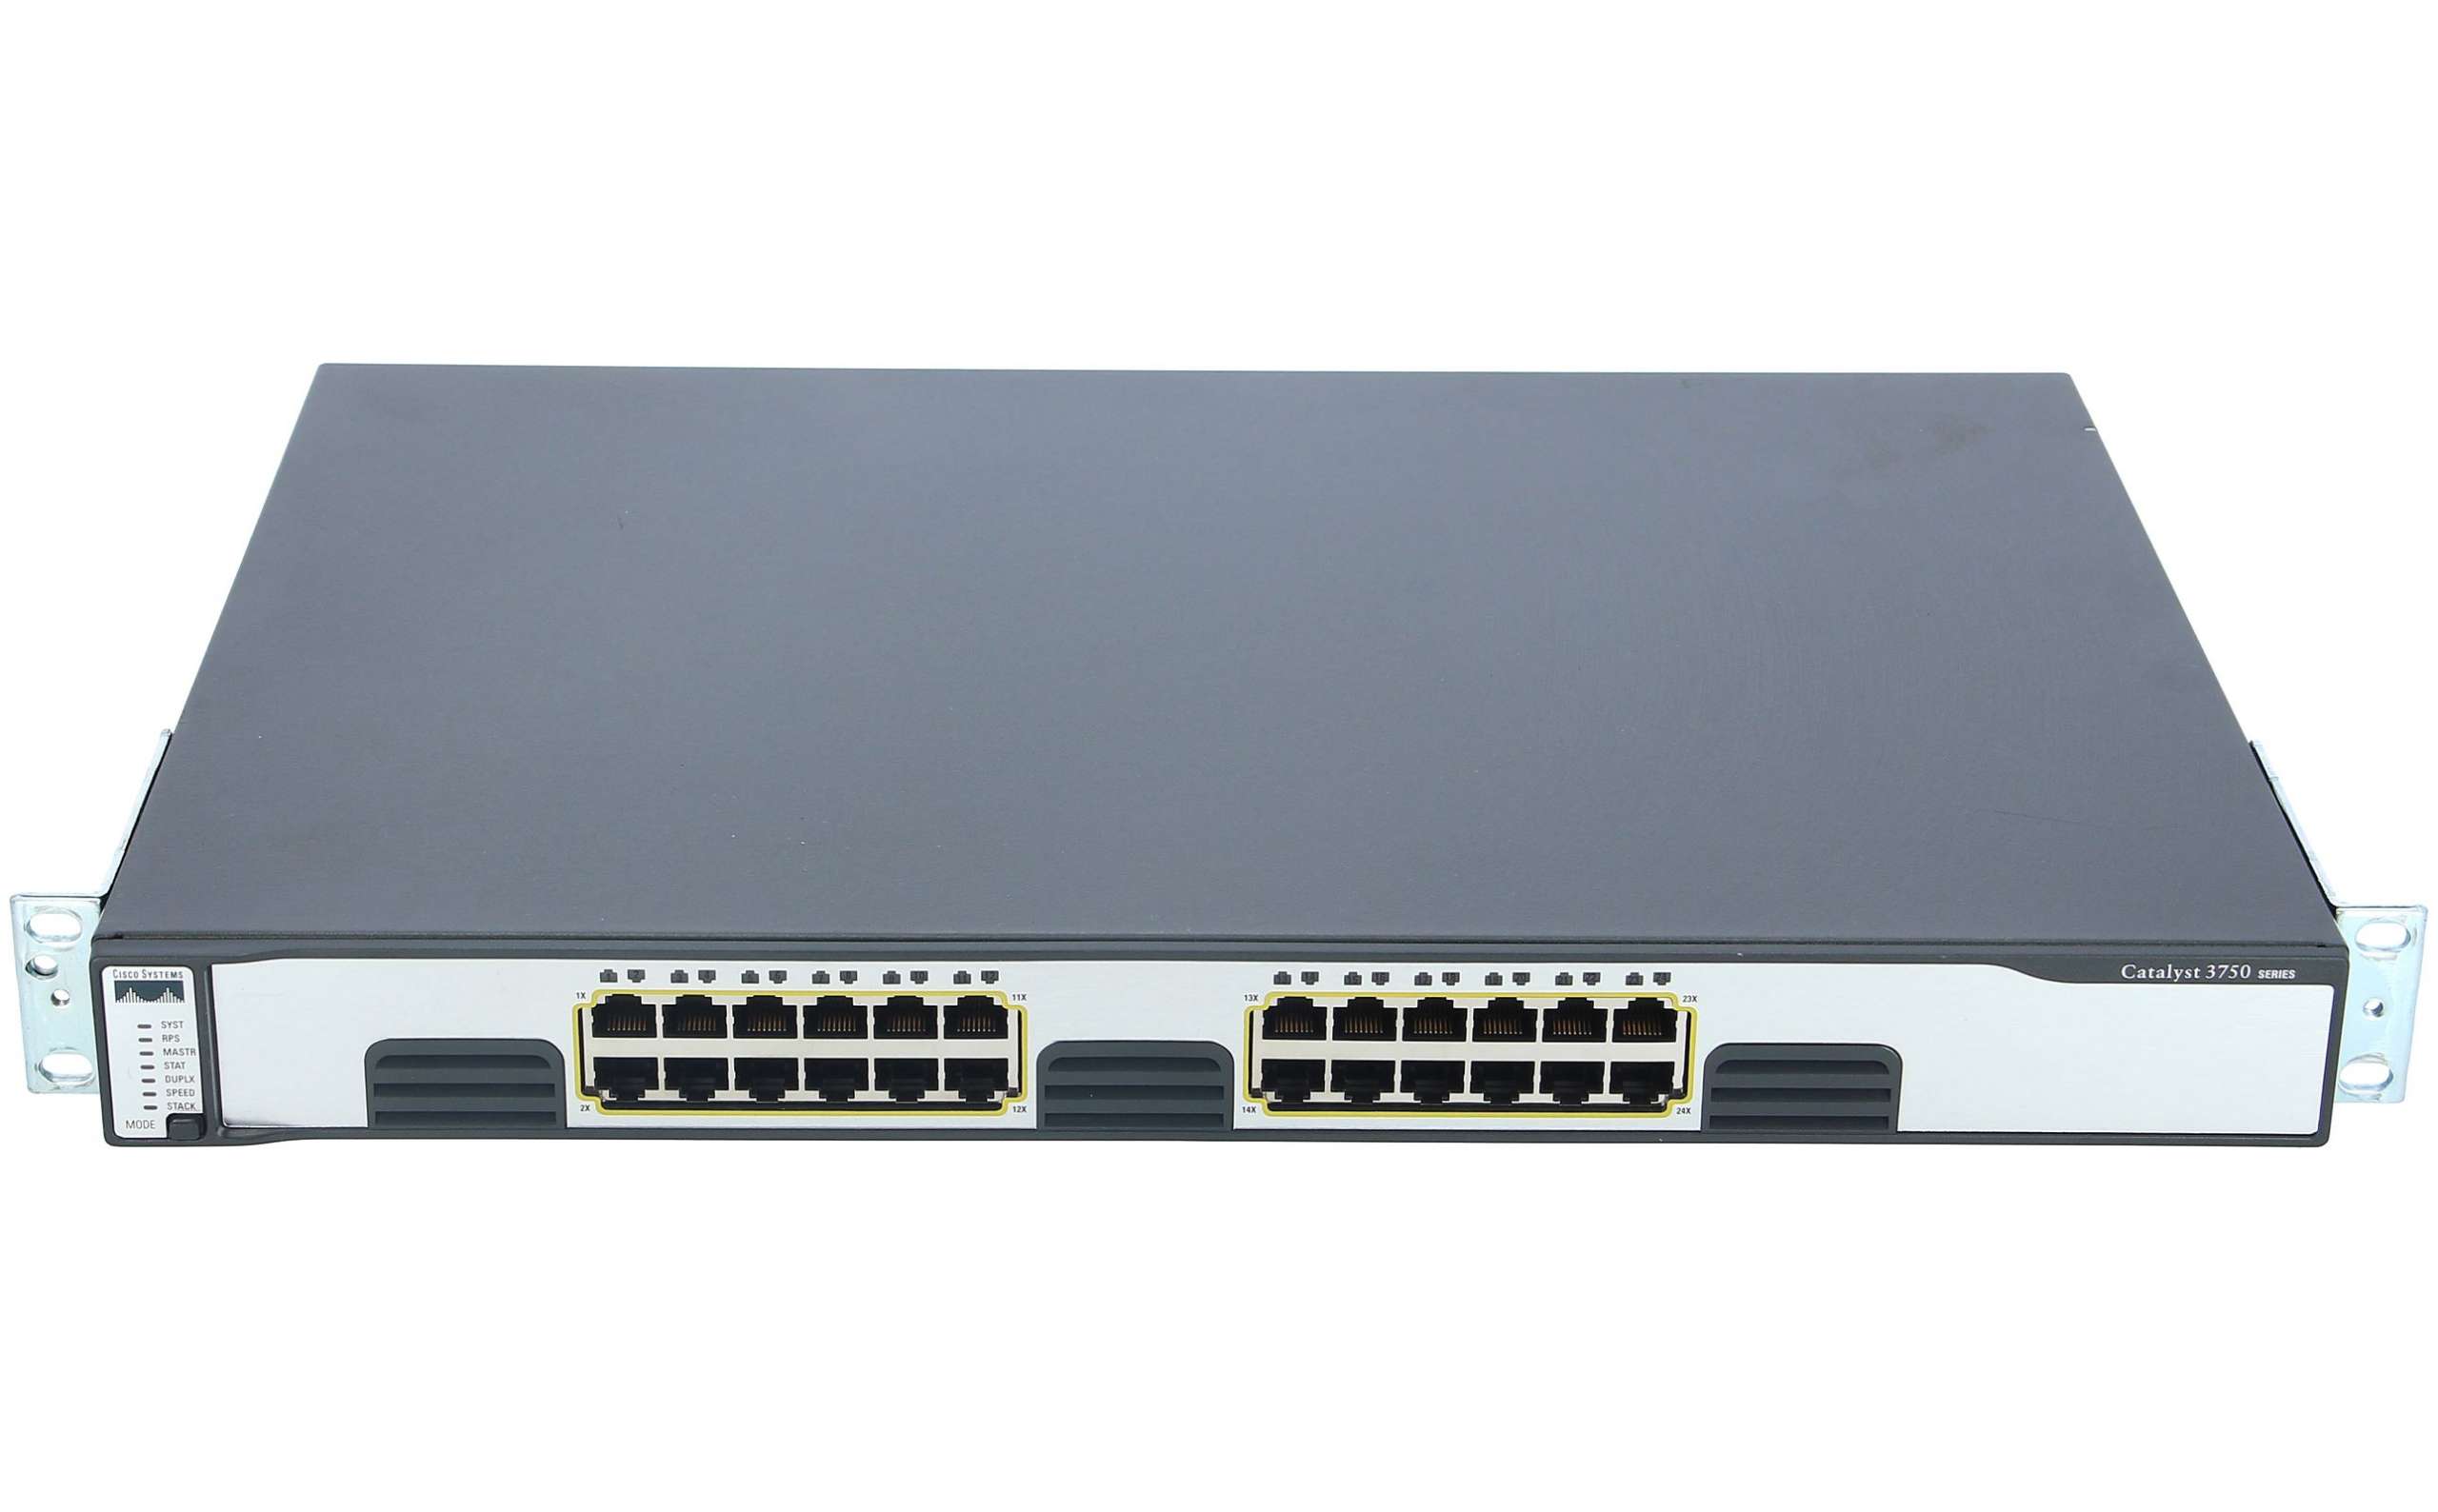 Cisco - WS-C3750G-24T-S - Catalyst 3750 24 10/100/1000T Standard Multilayer  Image new and refurbished buy online low prices